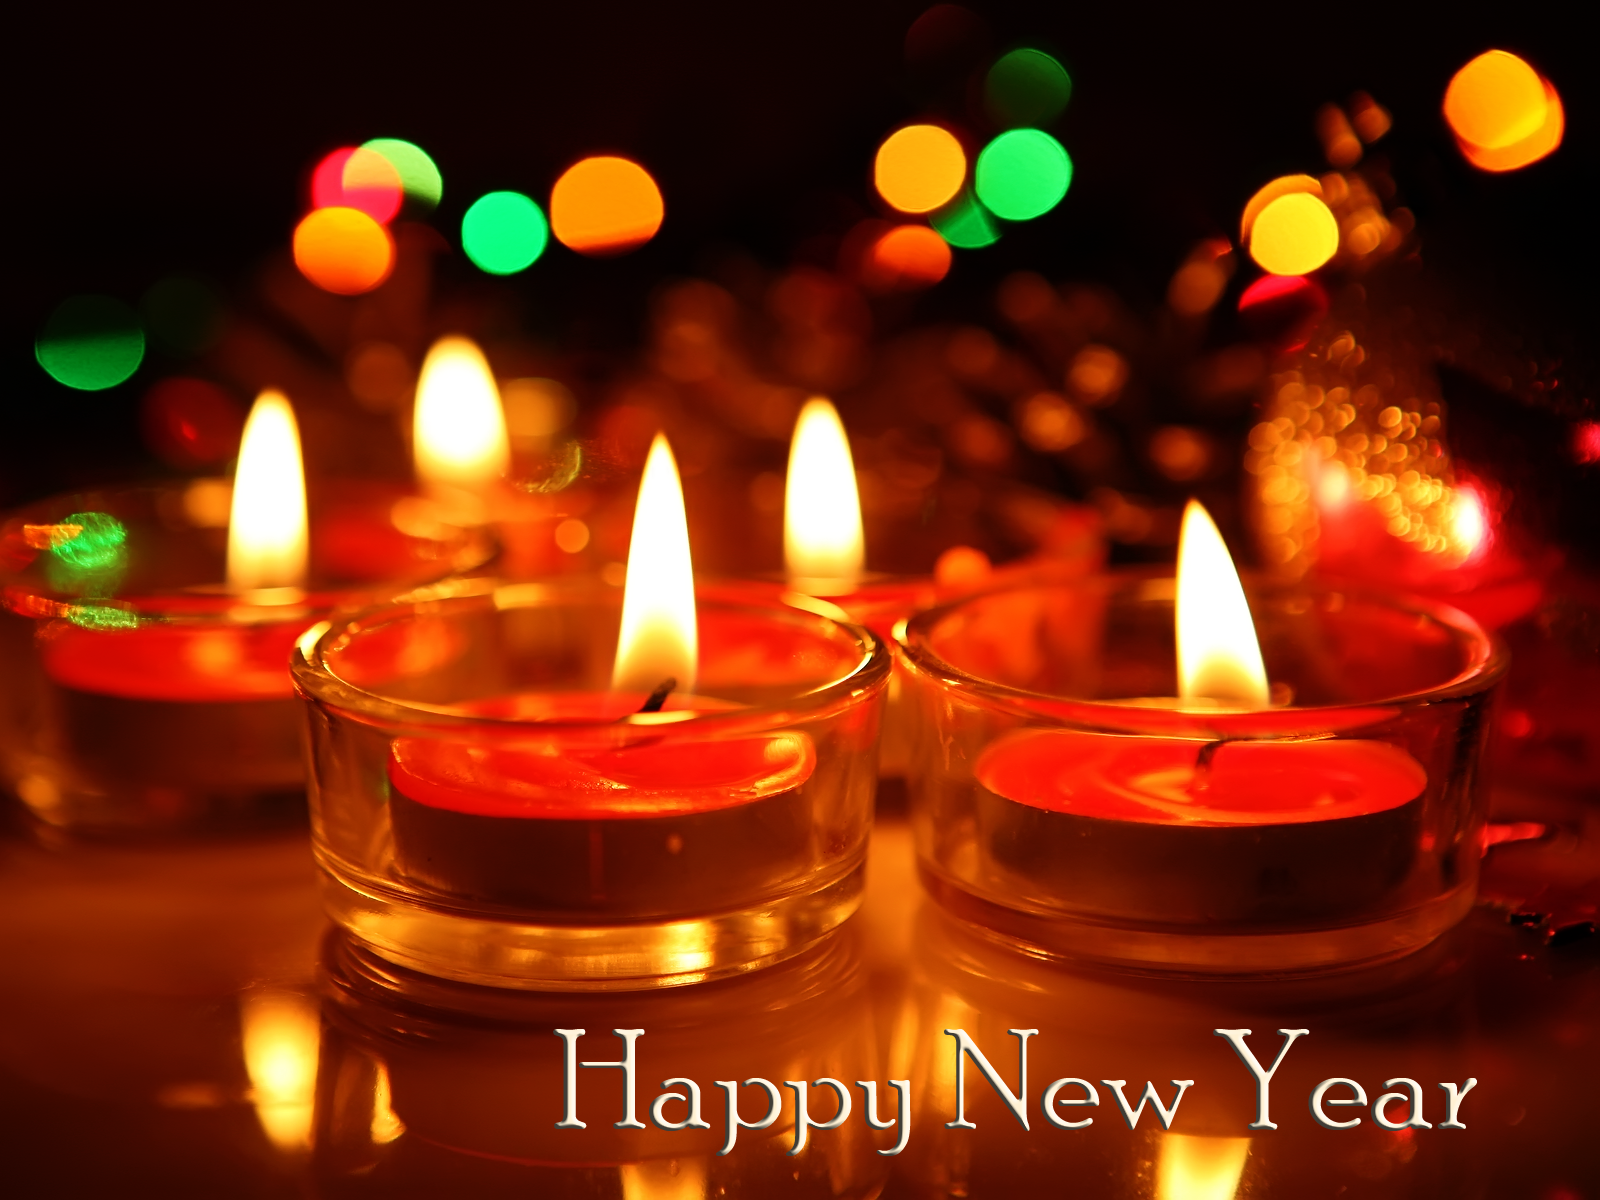 new year 2016 wallpapers desktop background Wallpapers Backgrounds